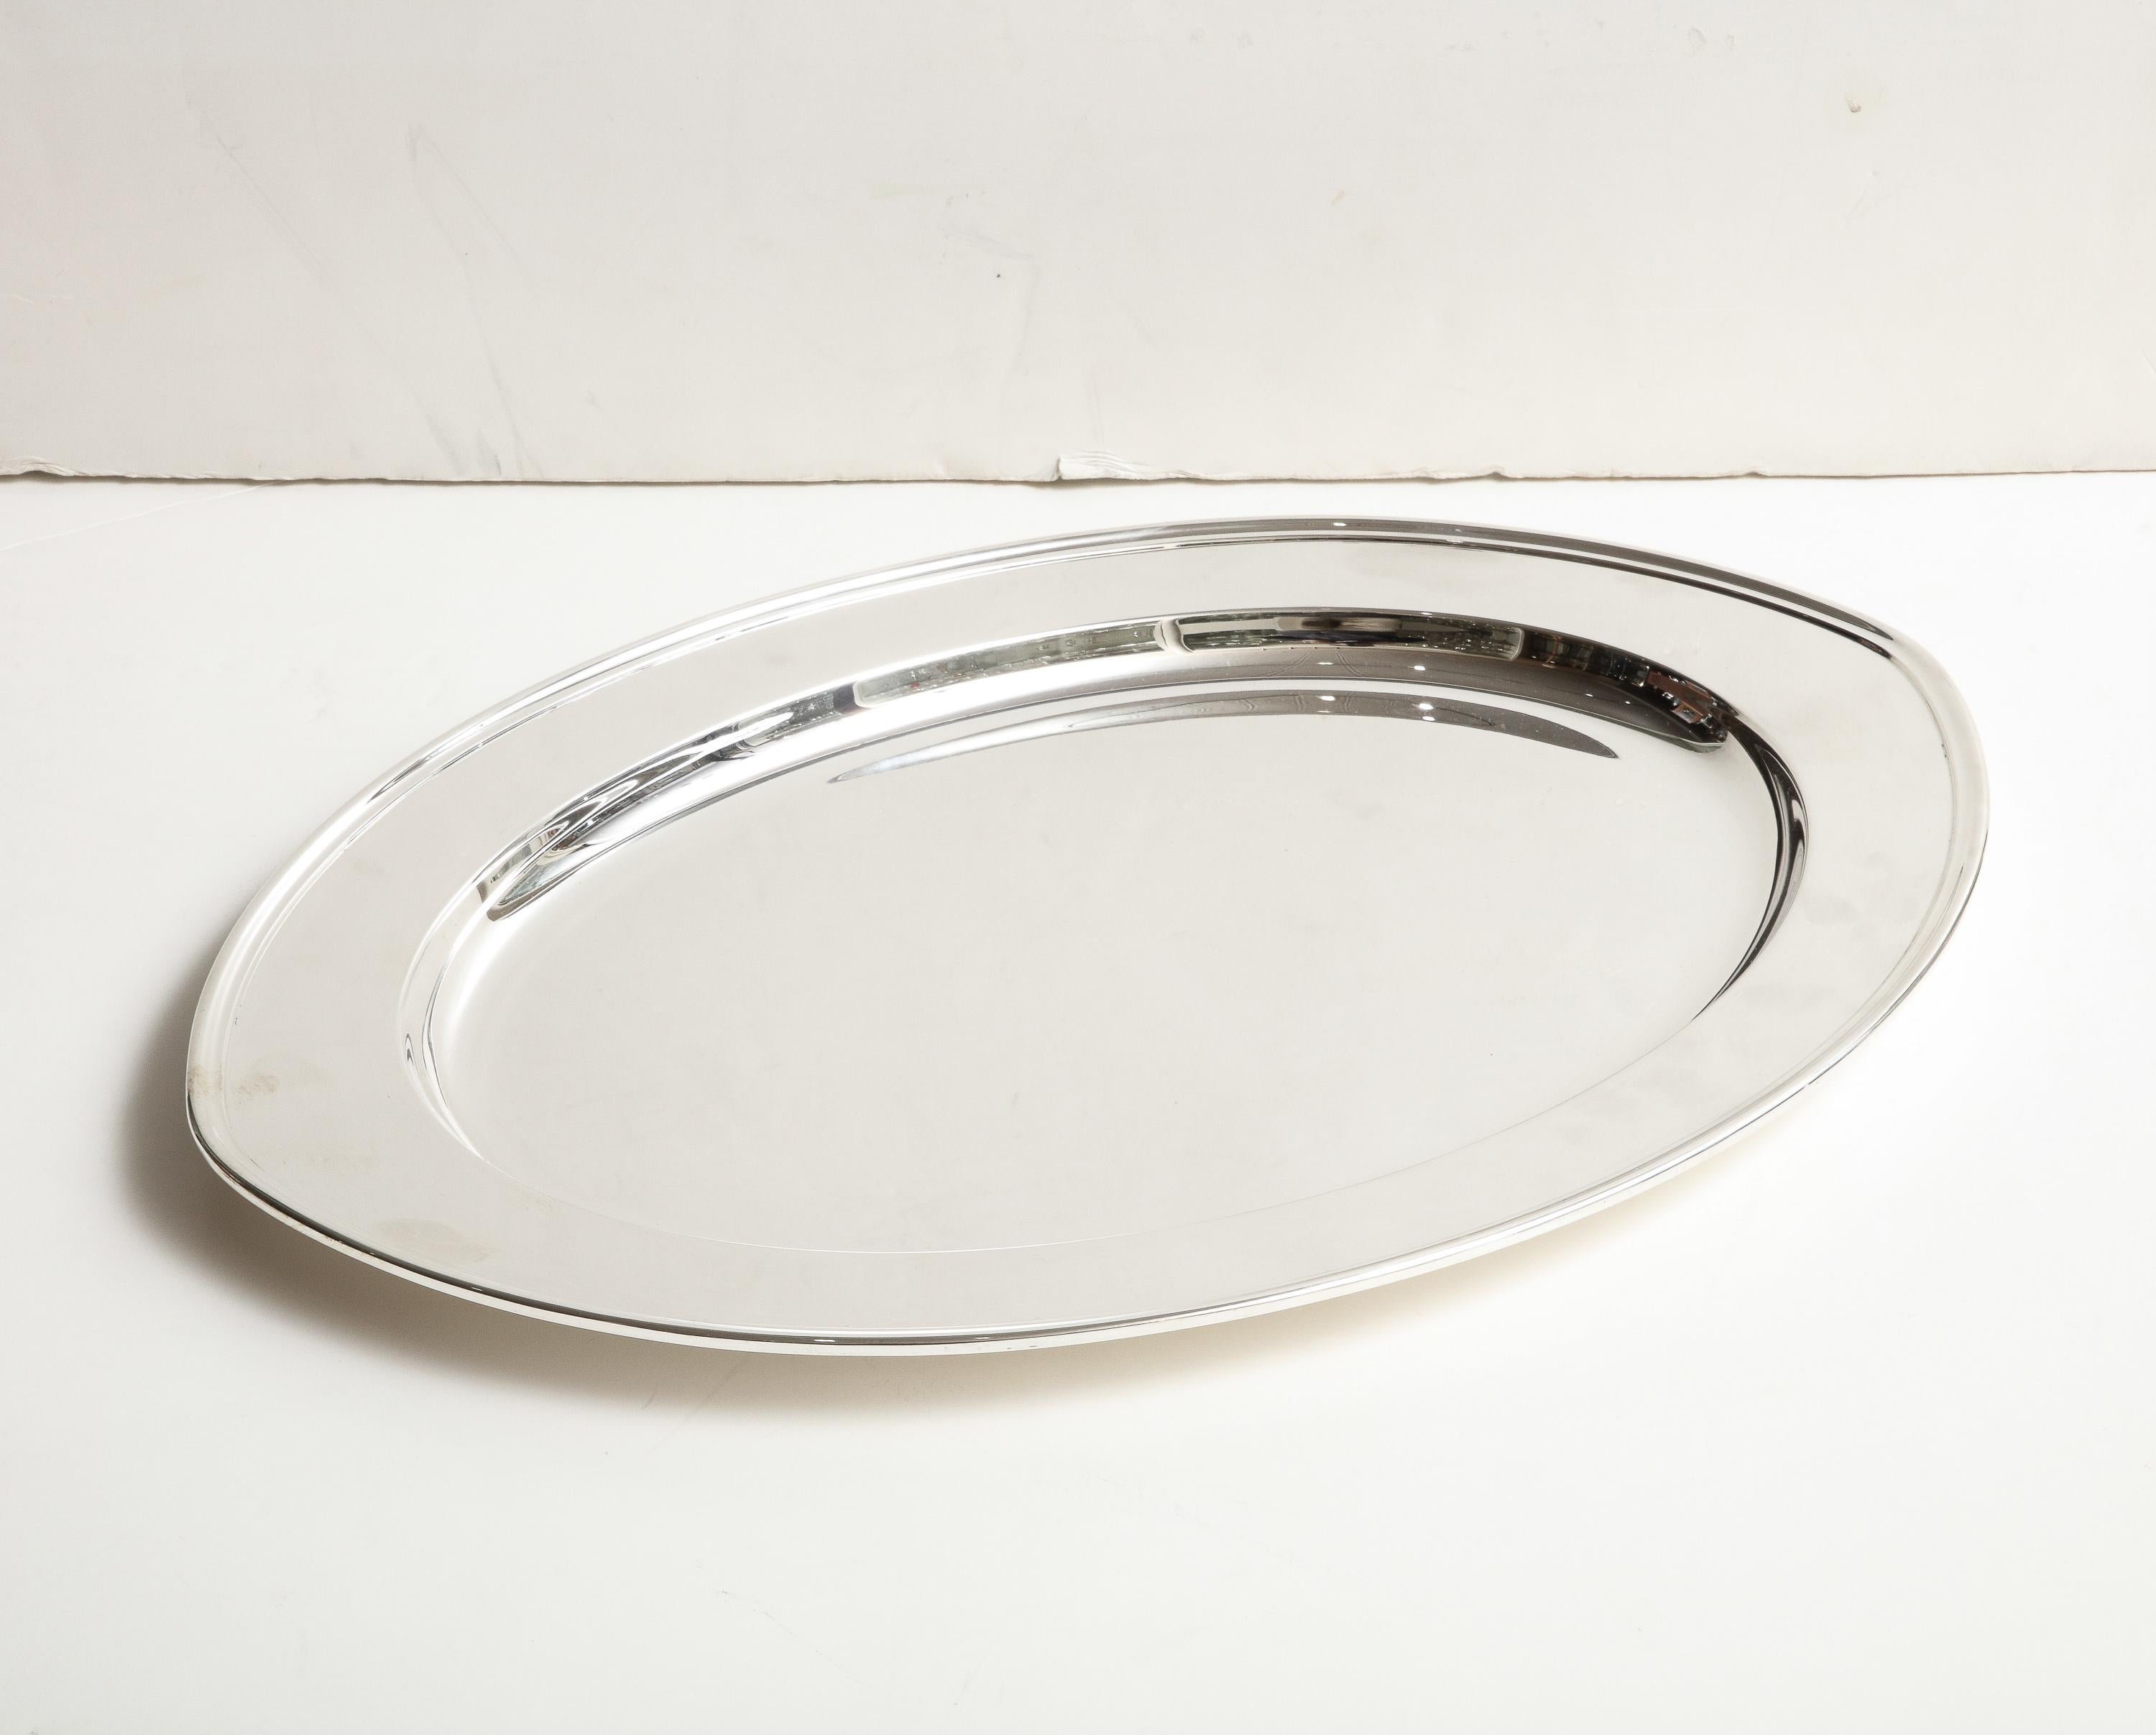 Large Art Deco Period Solid Sterling Silver Serving Platter By Gorham In Good Condition For Sale In New York, NY